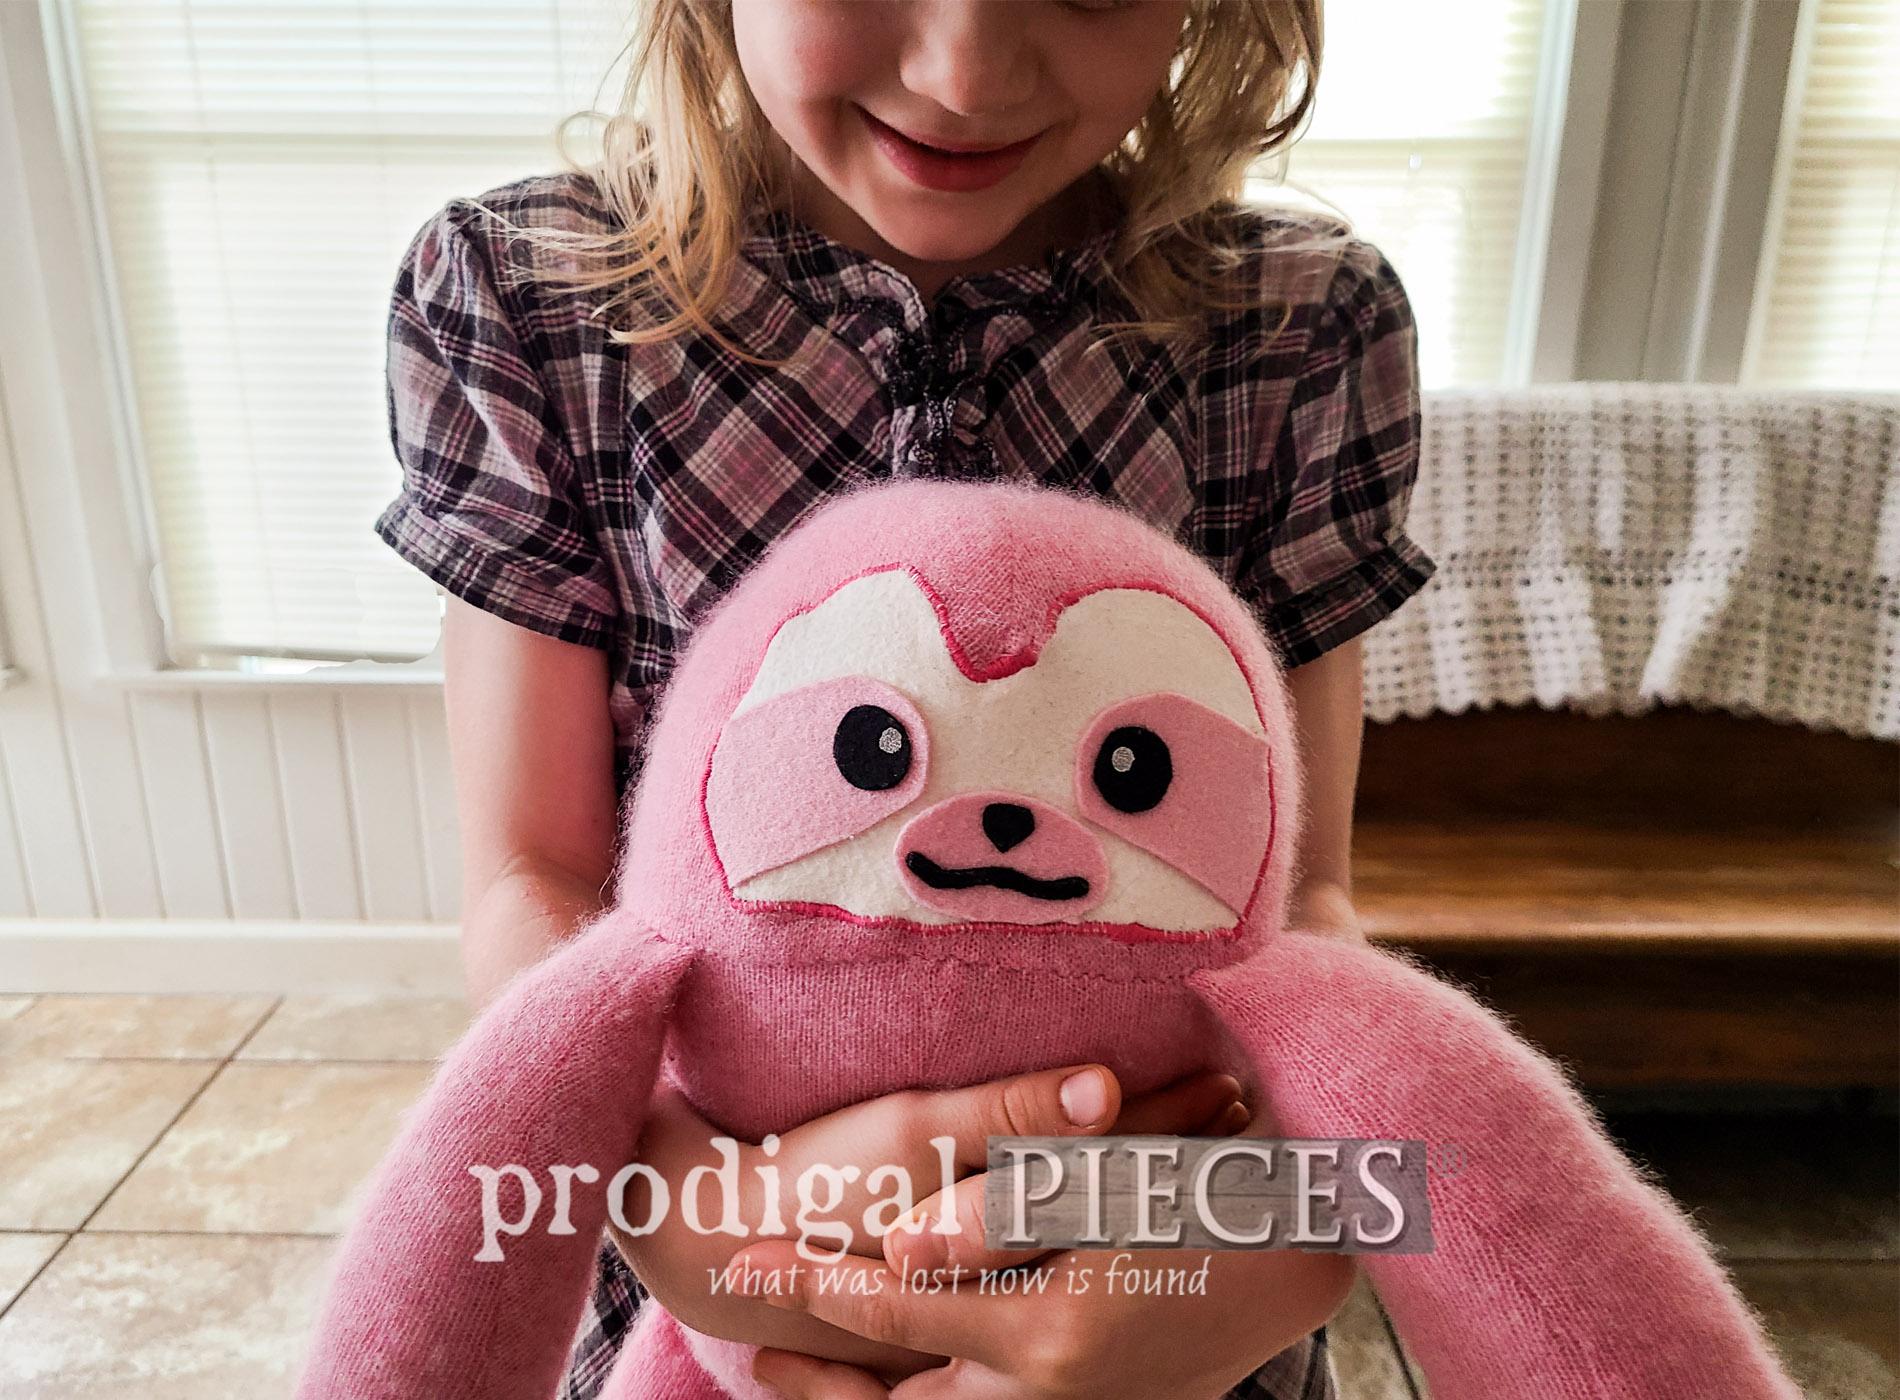 Featured Upcycled Sweater Sloth ~ DIY Refashion Fun by Larissa of Prodigal Pieces | prodigalpieces.com #prodigalpieces #refashion #diy #toys #upcycle #kids